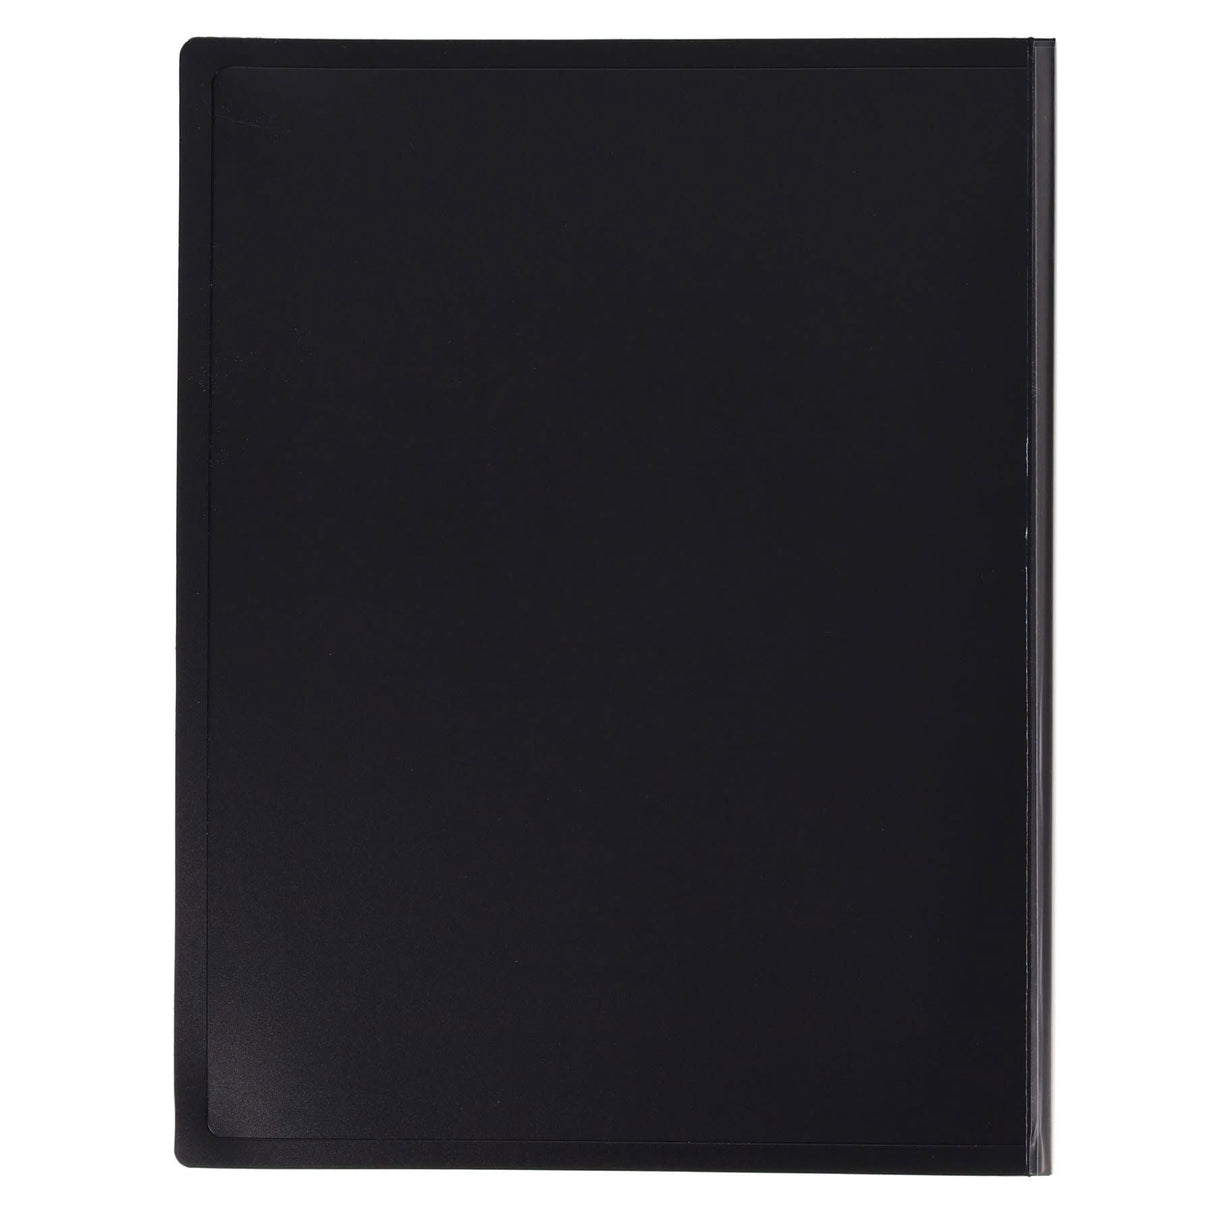 Concept A4 Display Book - 60 Pockets | Stationery Shop UK